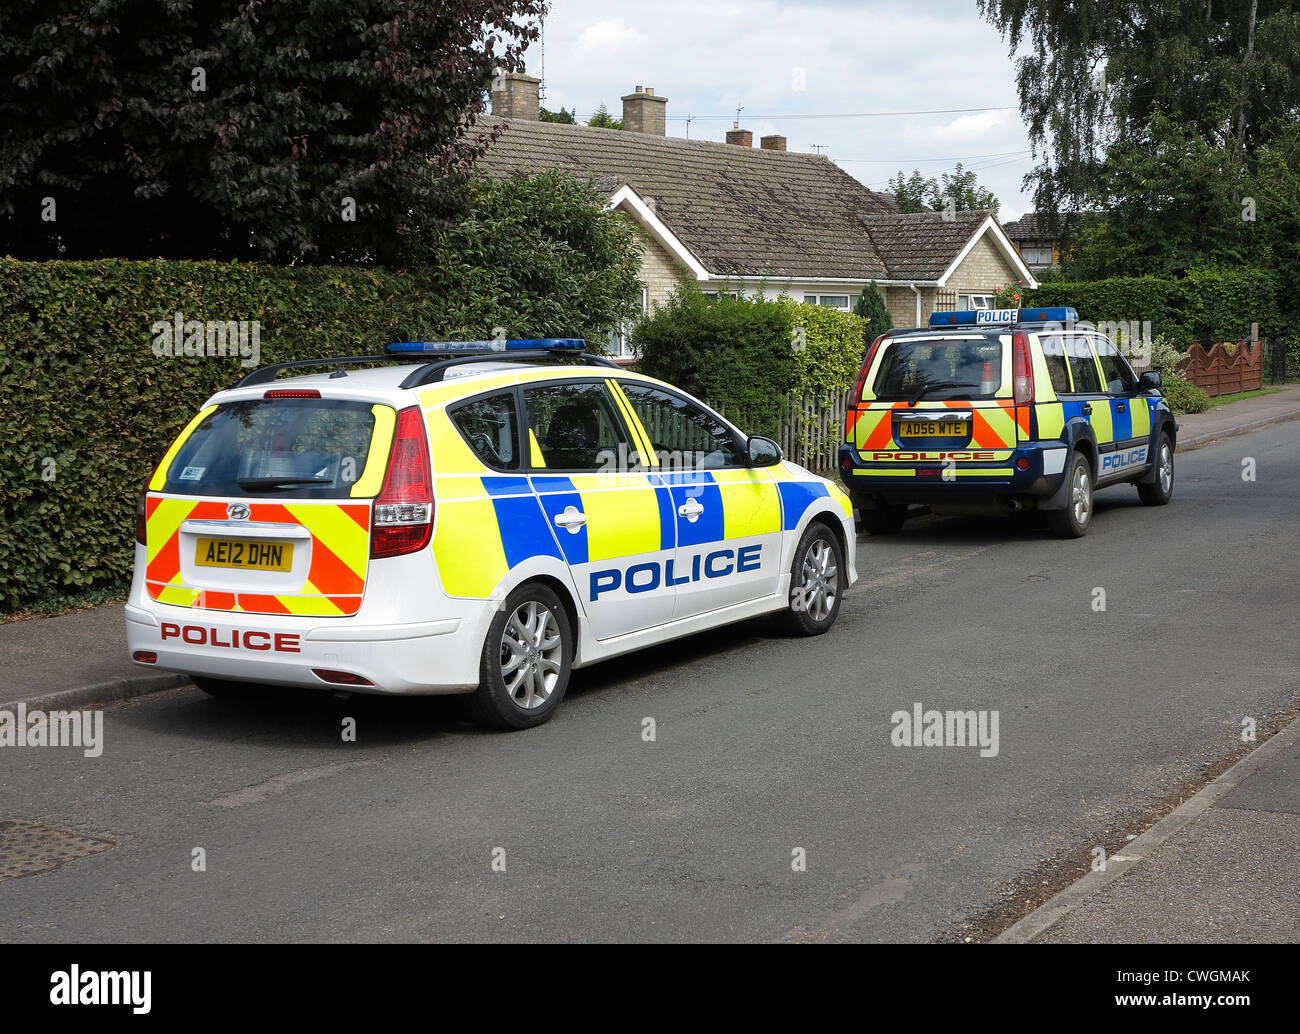 Two police cars parked in street Stock Photo